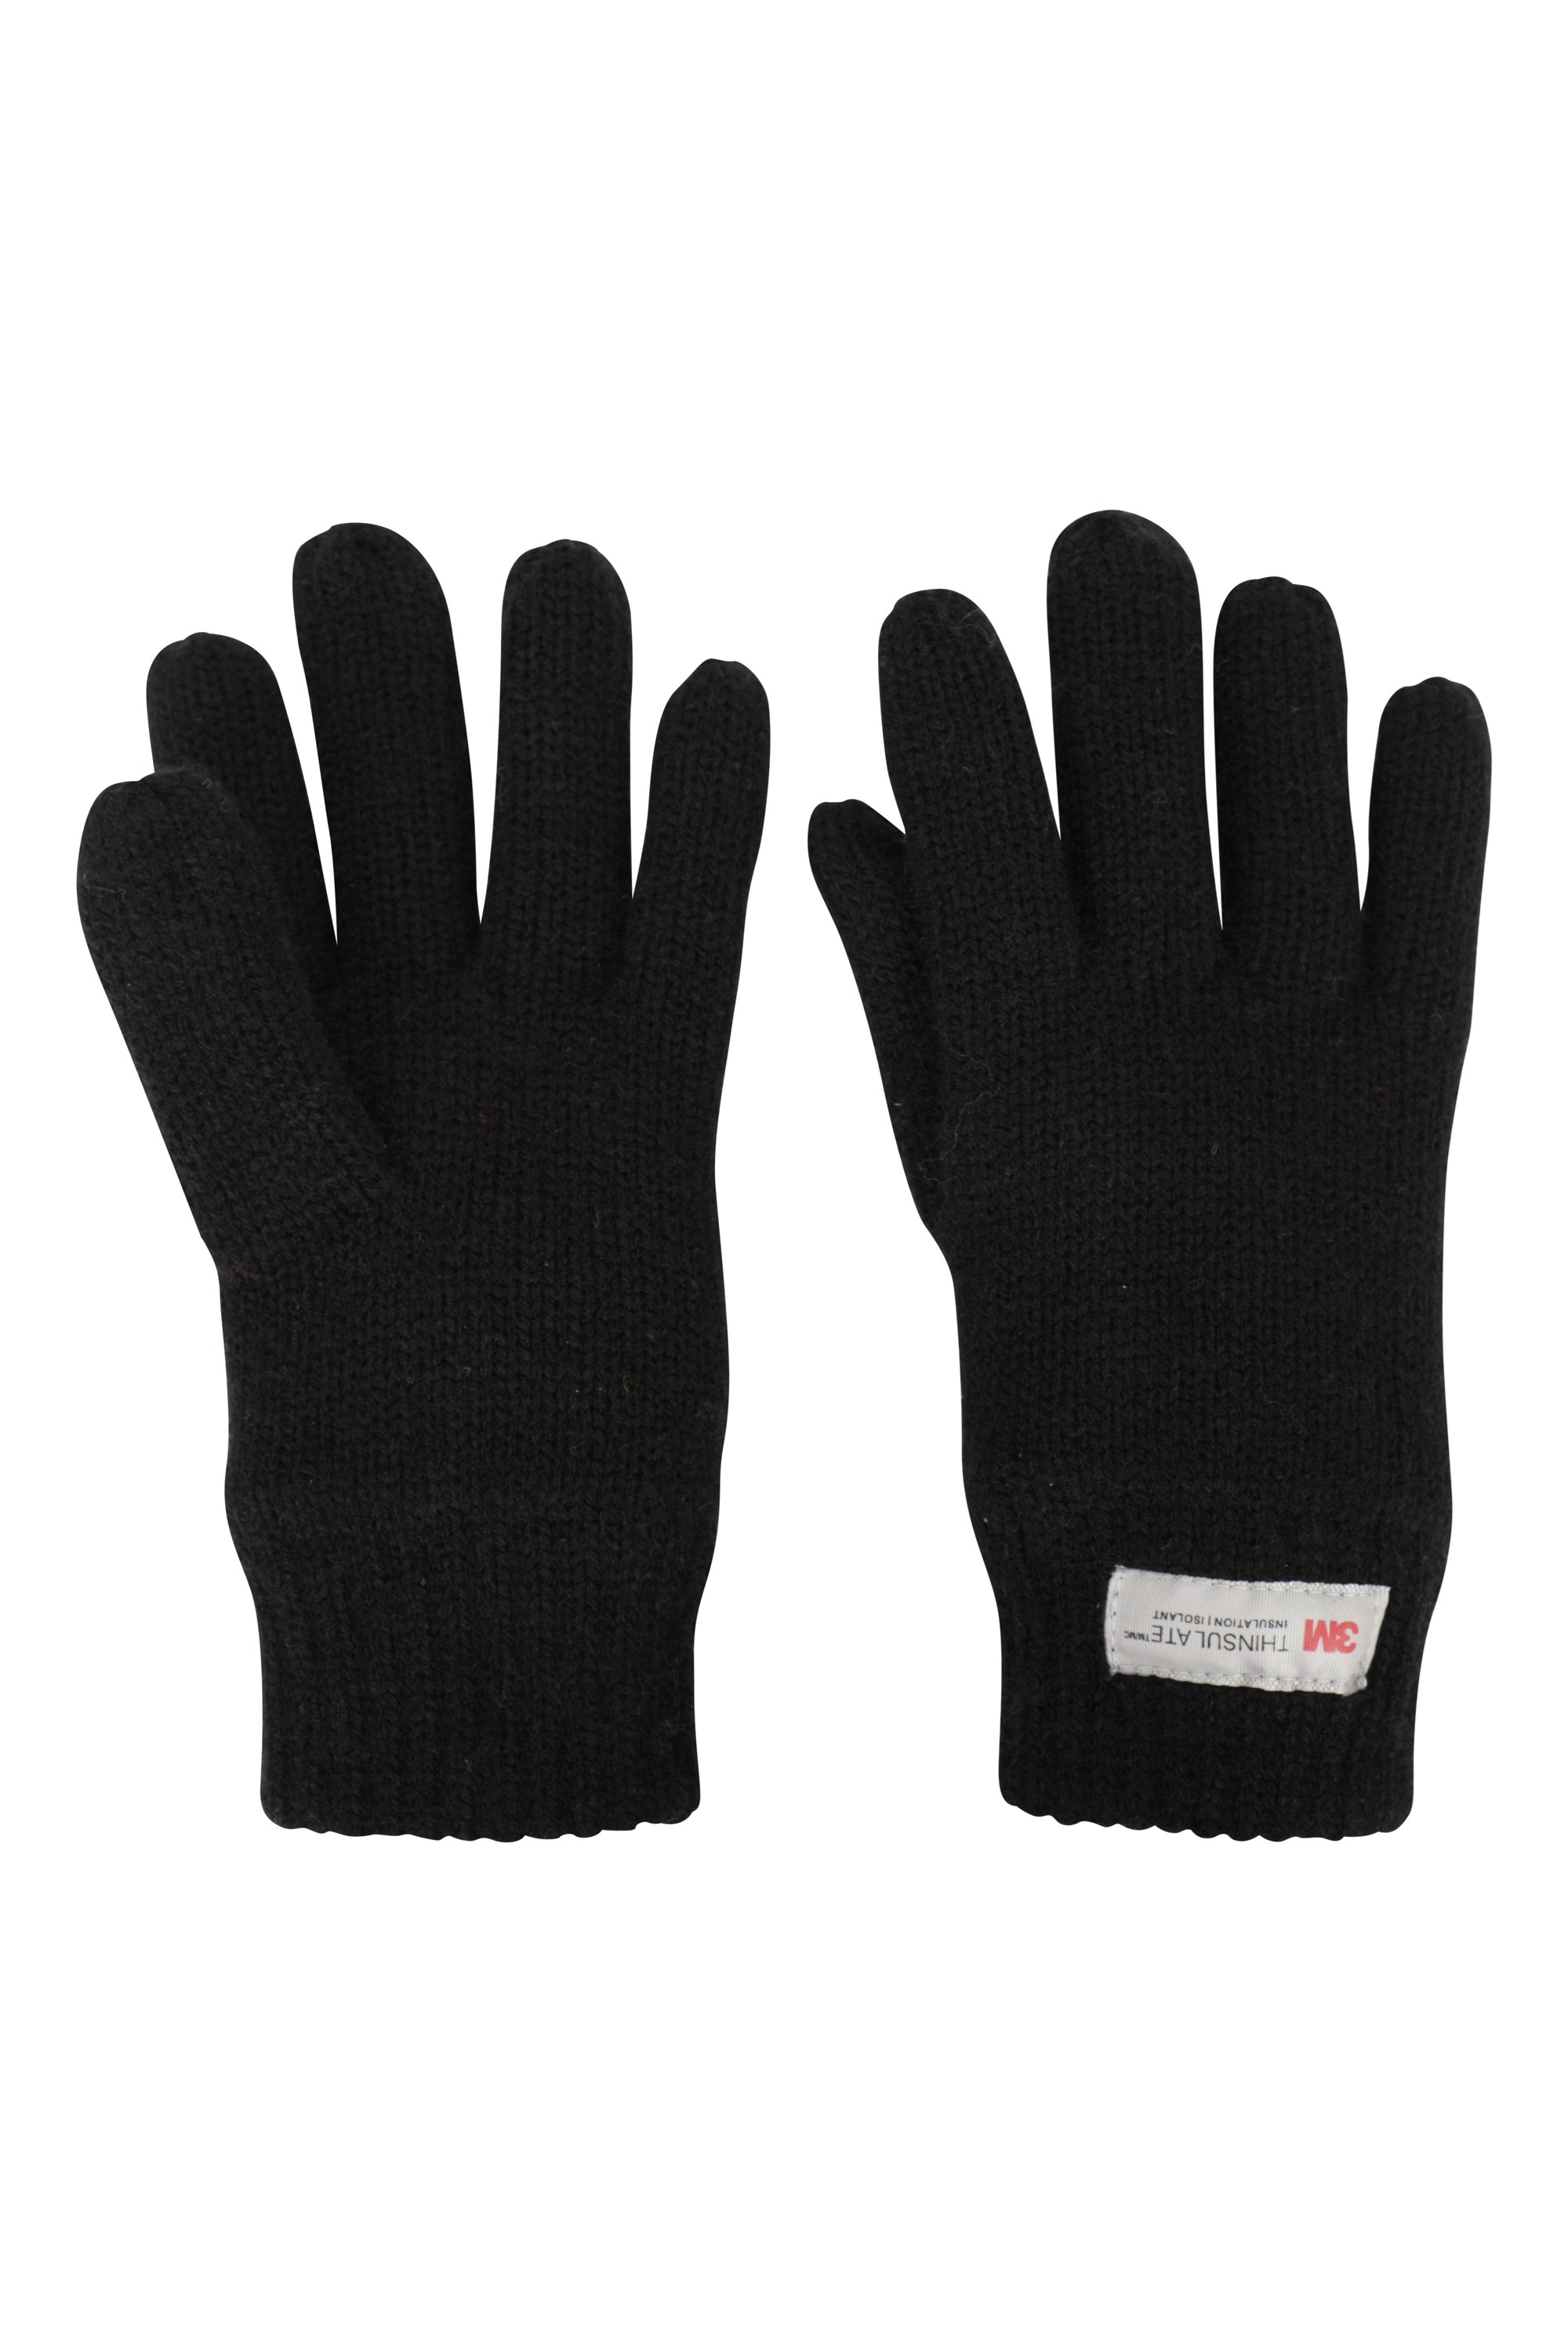 Kids Knitted Thinsulate Thermal Gloves - Black